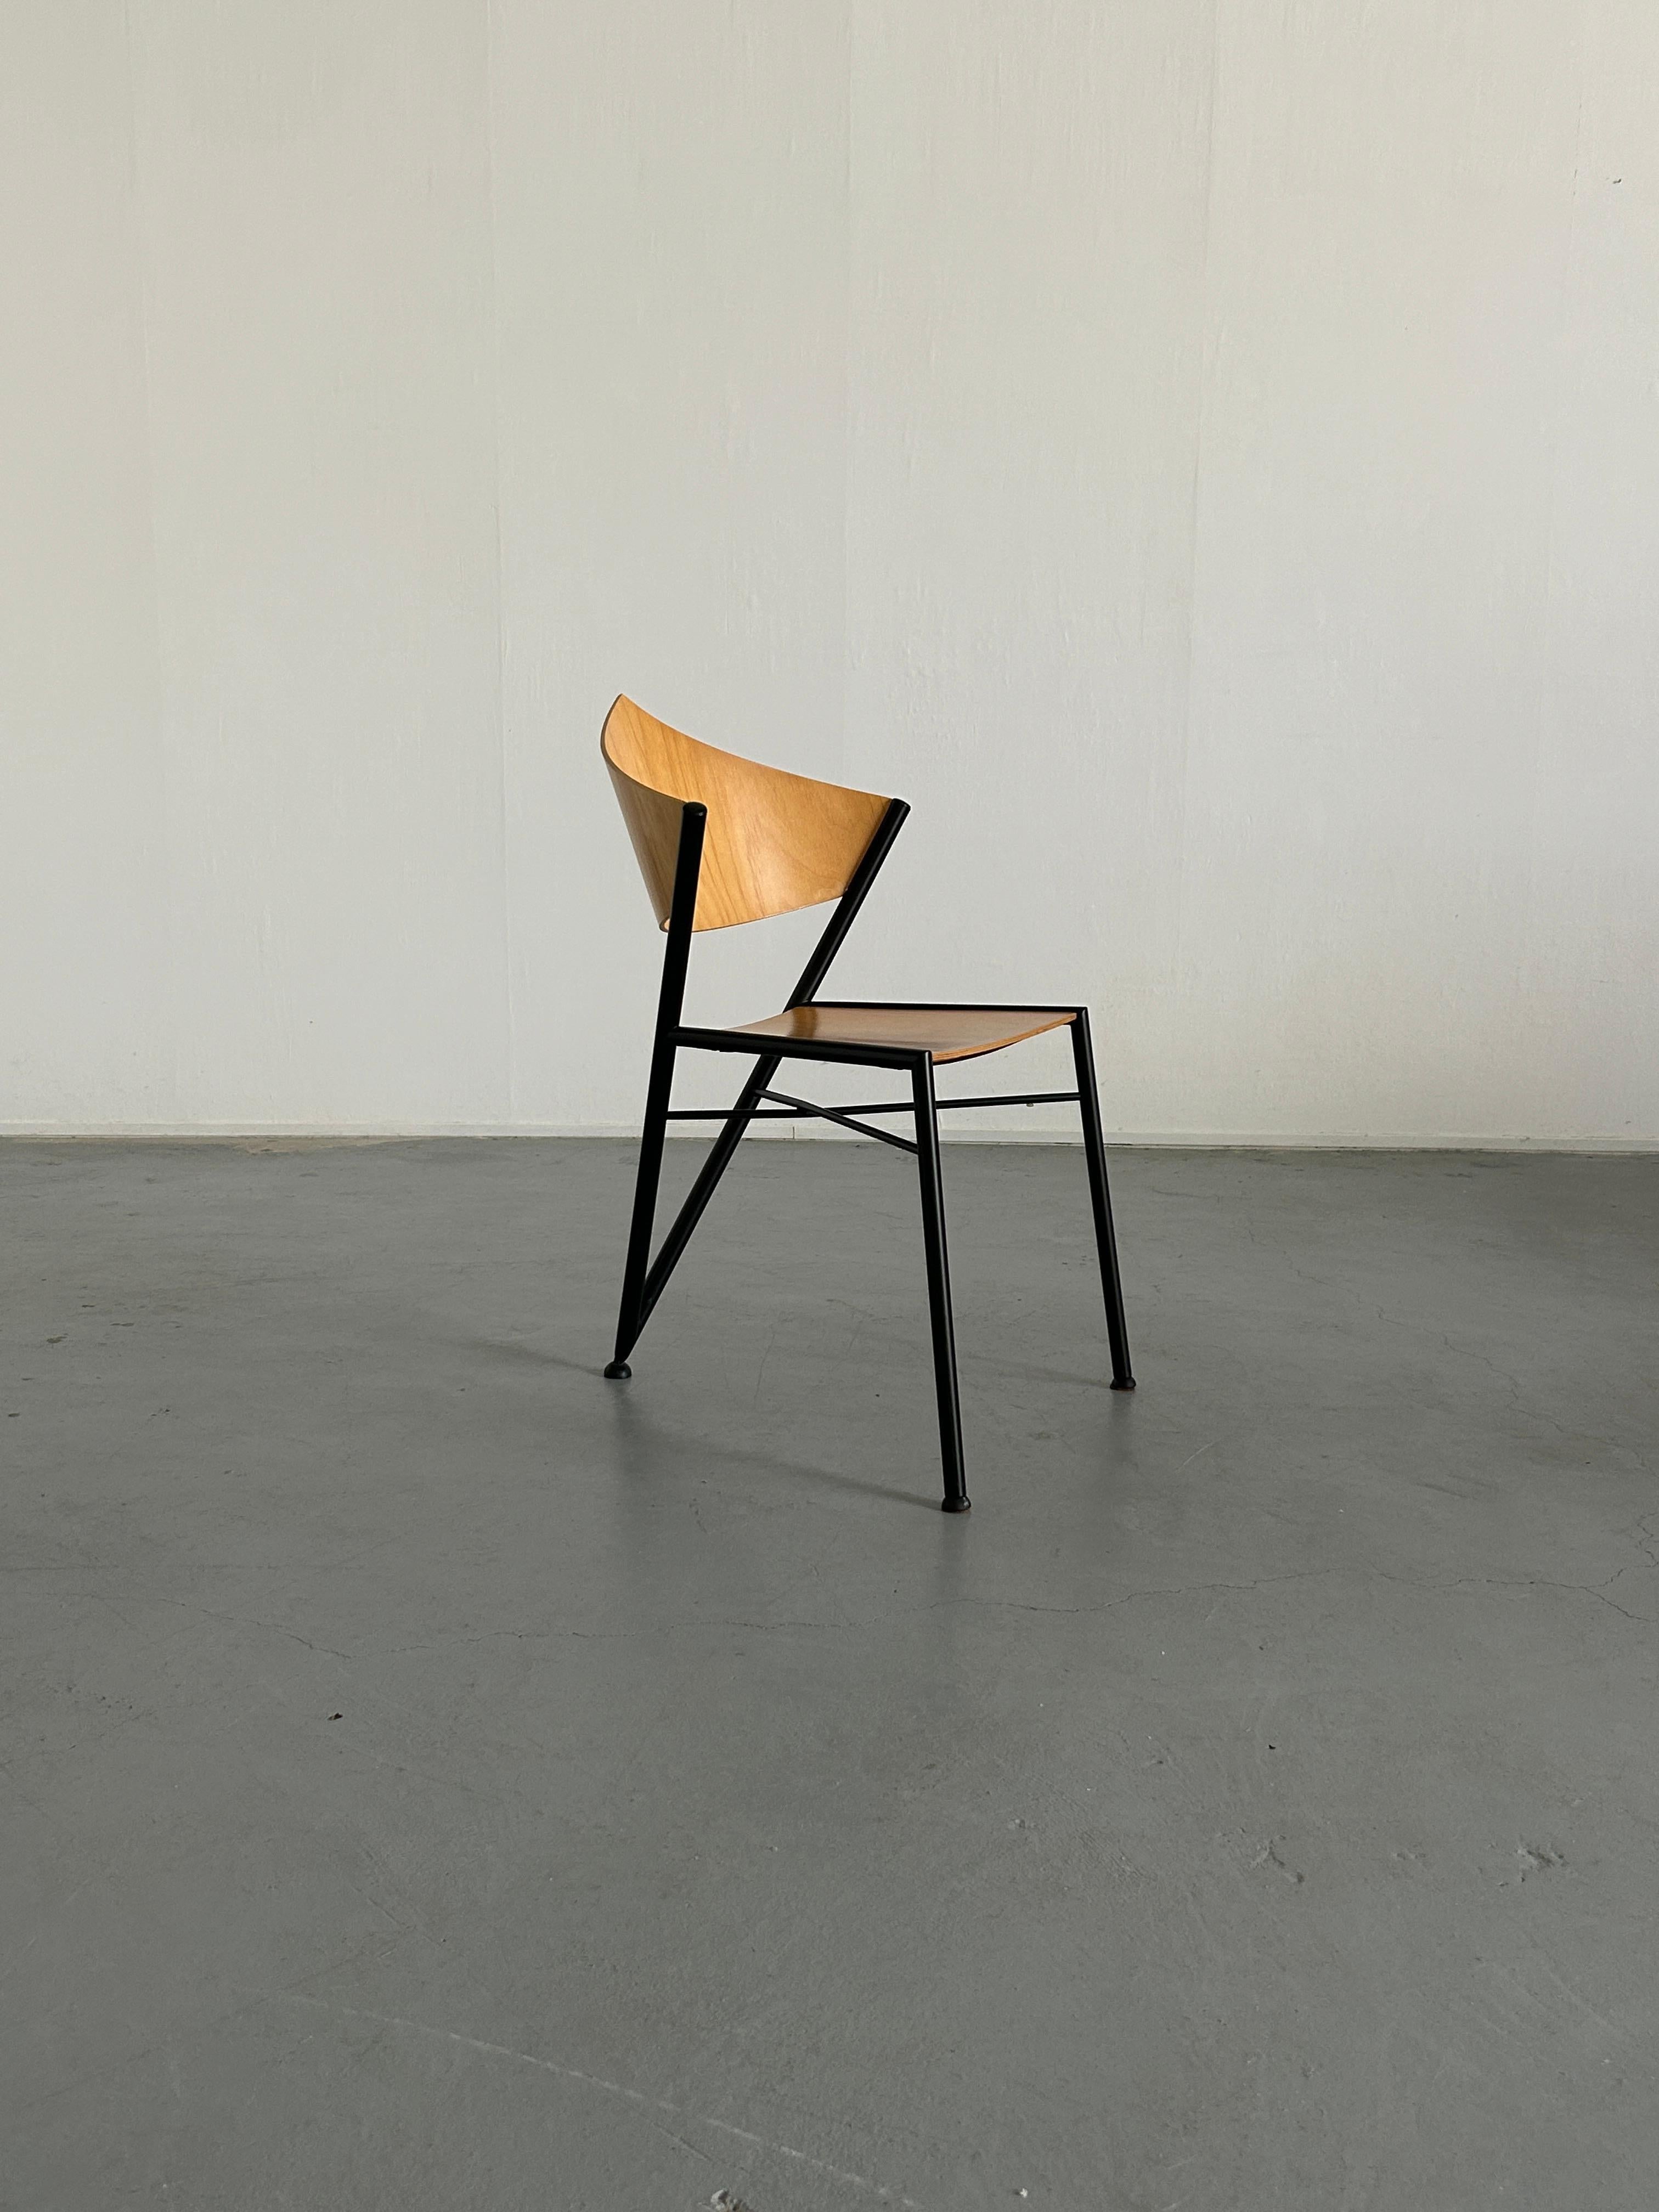 1 of 6 Postmodern Metal Framed Plywood Chairs, Memphis Design, 1980s Italy 5